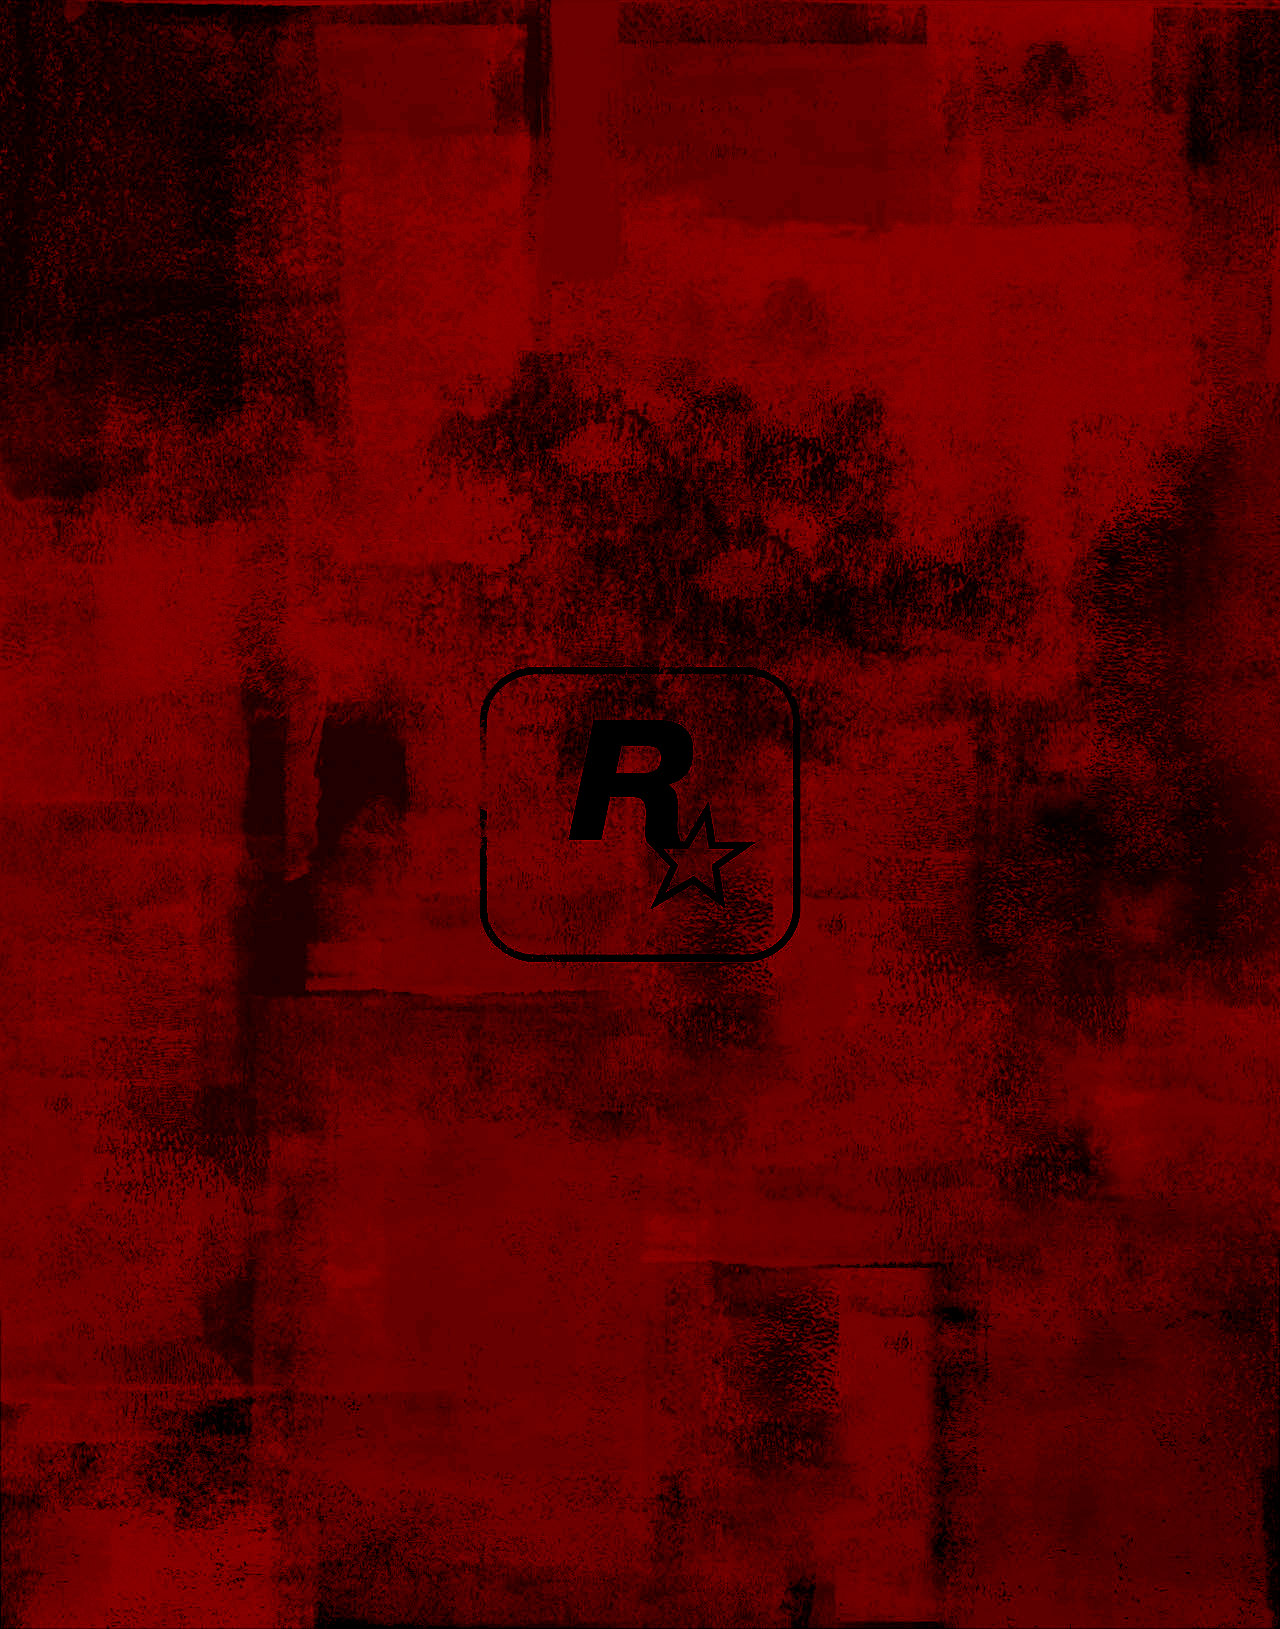 Rockstar Background Image In Collection